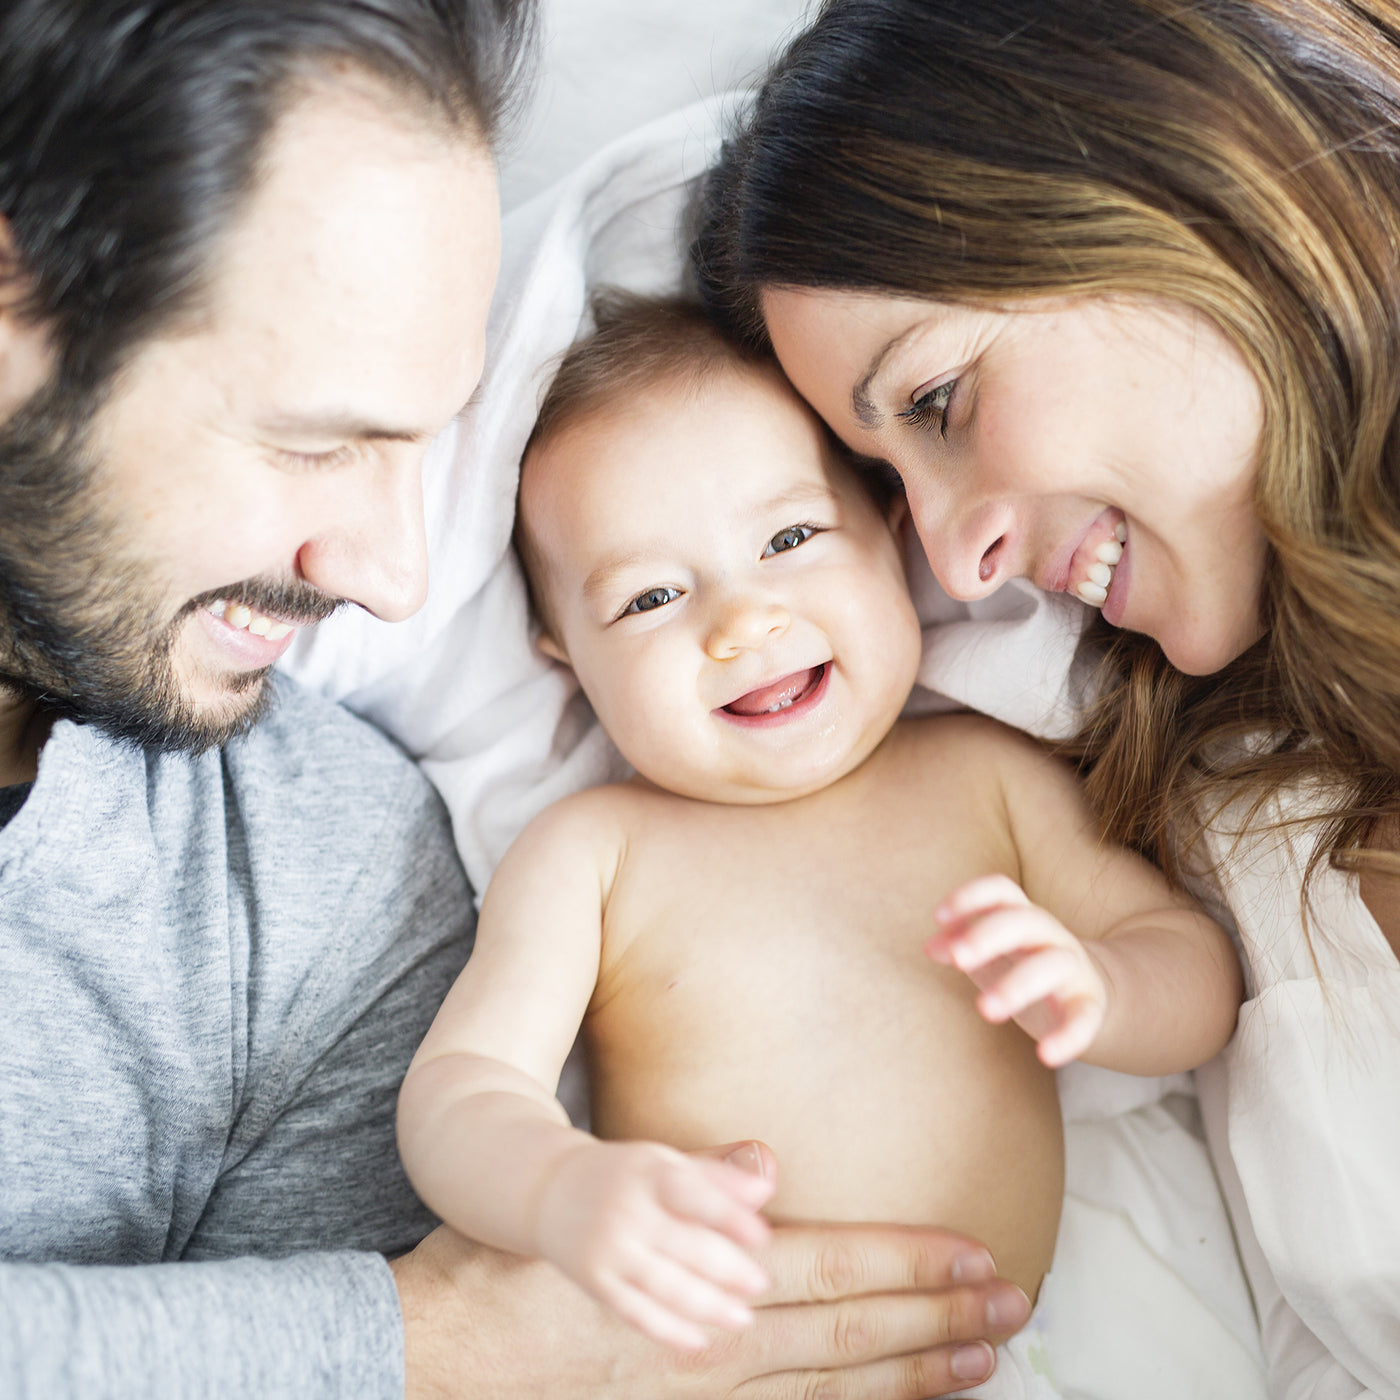 couples on bed with baby and smiling in close shot